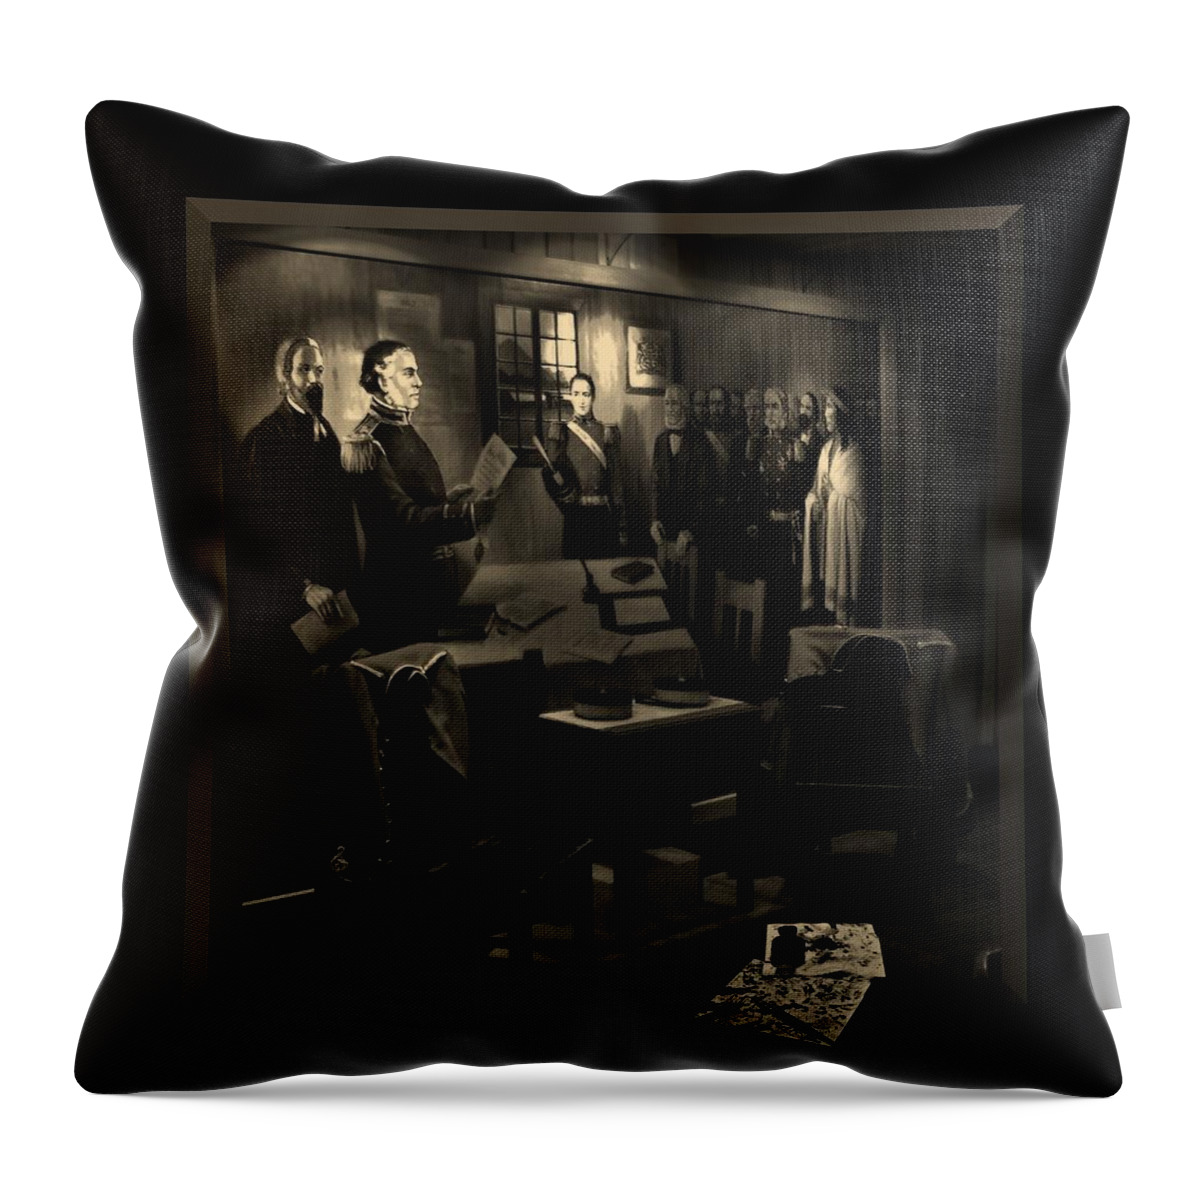 Inked In Forked Tongue Throw Pillow featuring the photograph Inked in Forked Tongue by Barbara St Jean